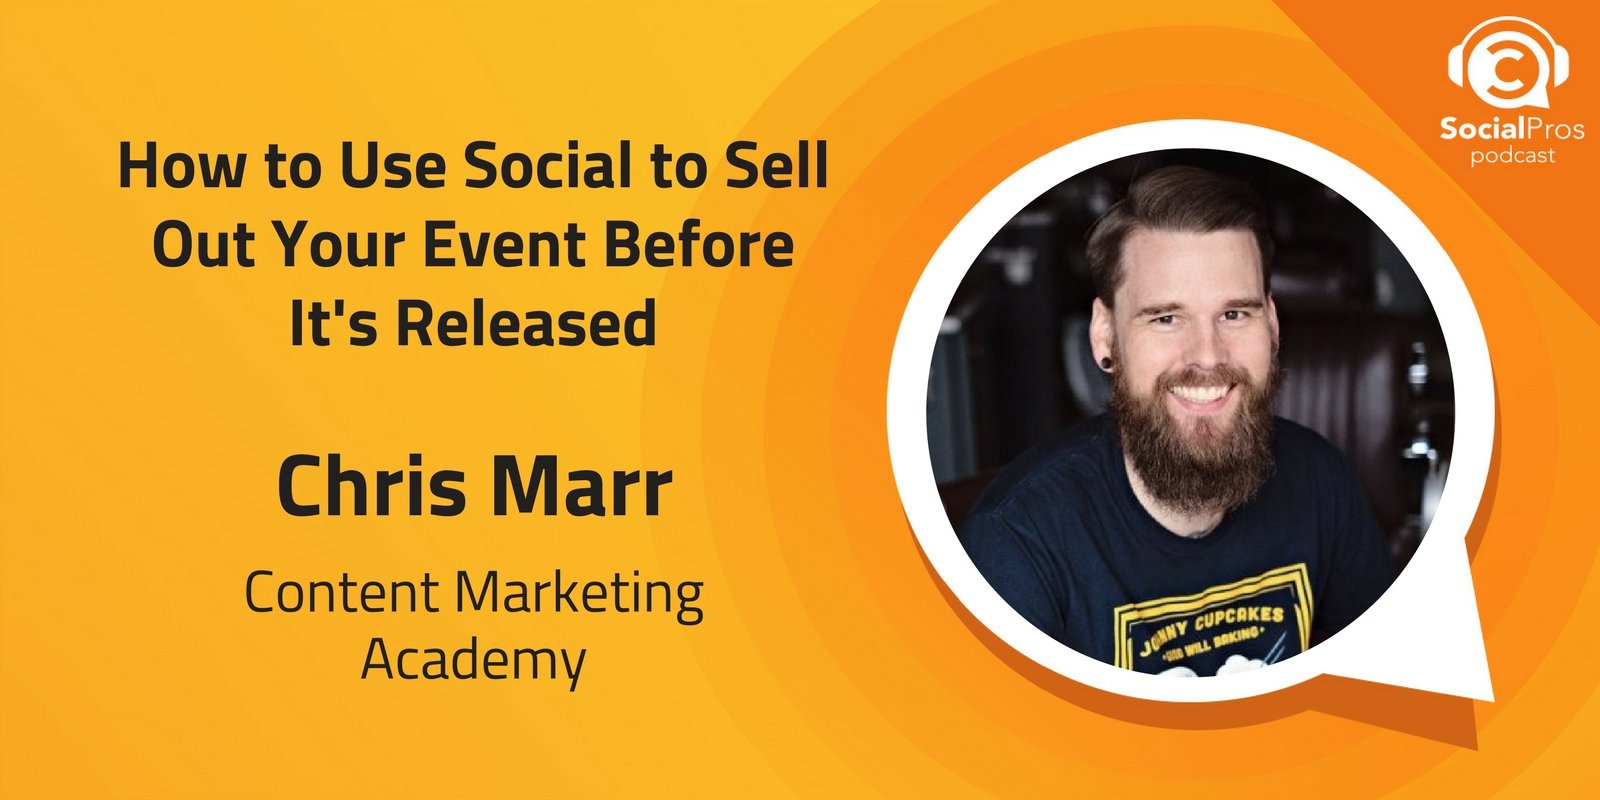 How to Use Social to Sell Out Your Event Before It's Released